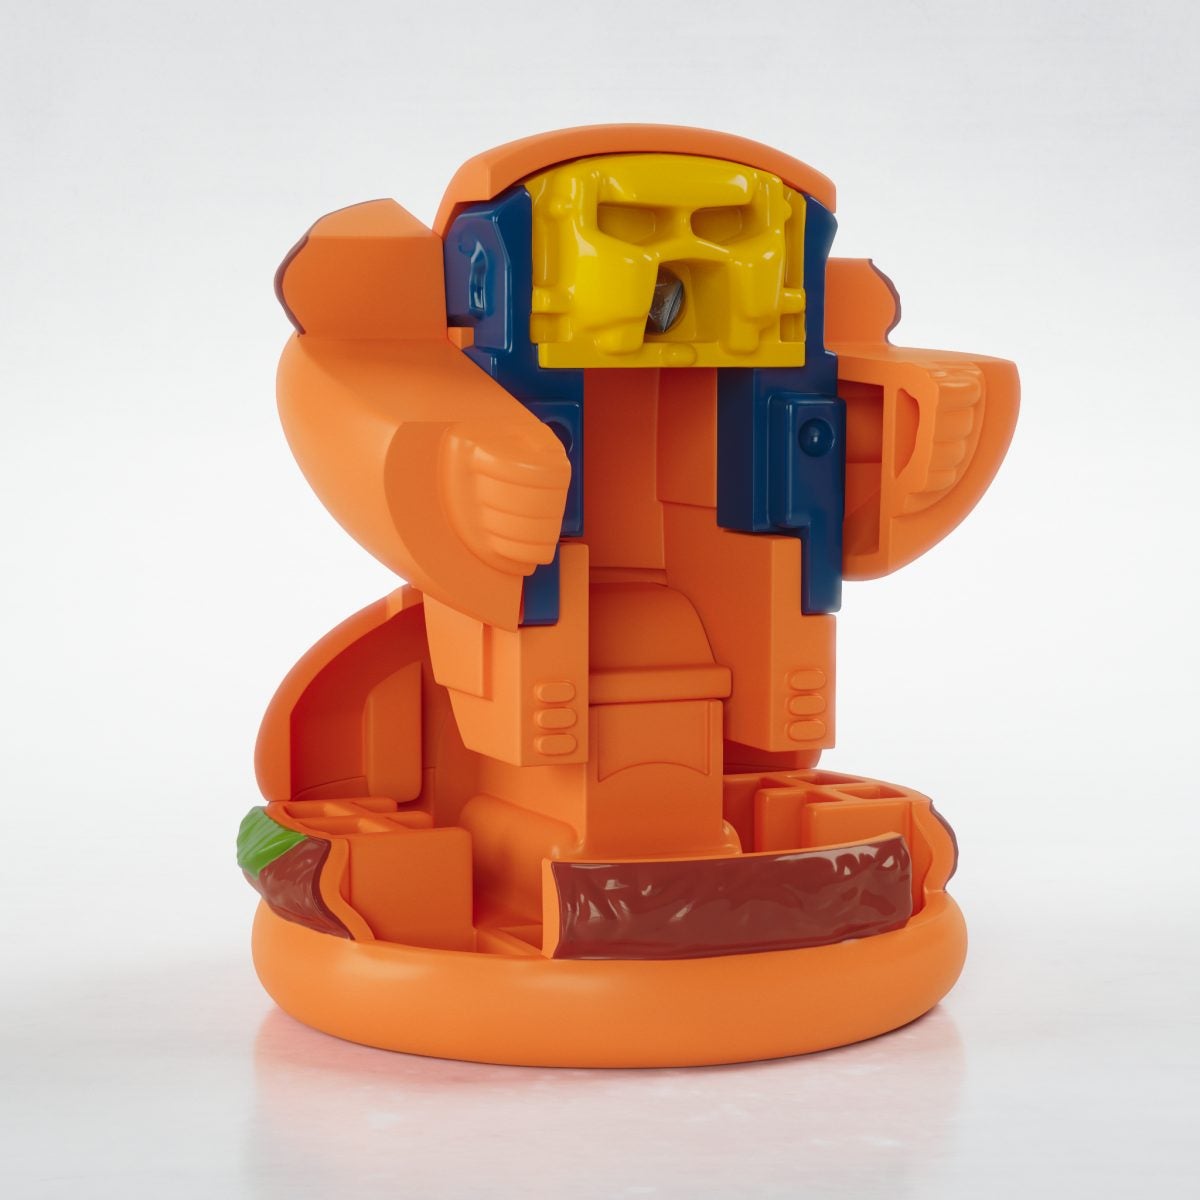 Iconic Mcdonald's Happy Meal Toys From Our Childhood Available From Nov 28 &Amp; We're Feeling Nostalgic - World Of Buzz 6